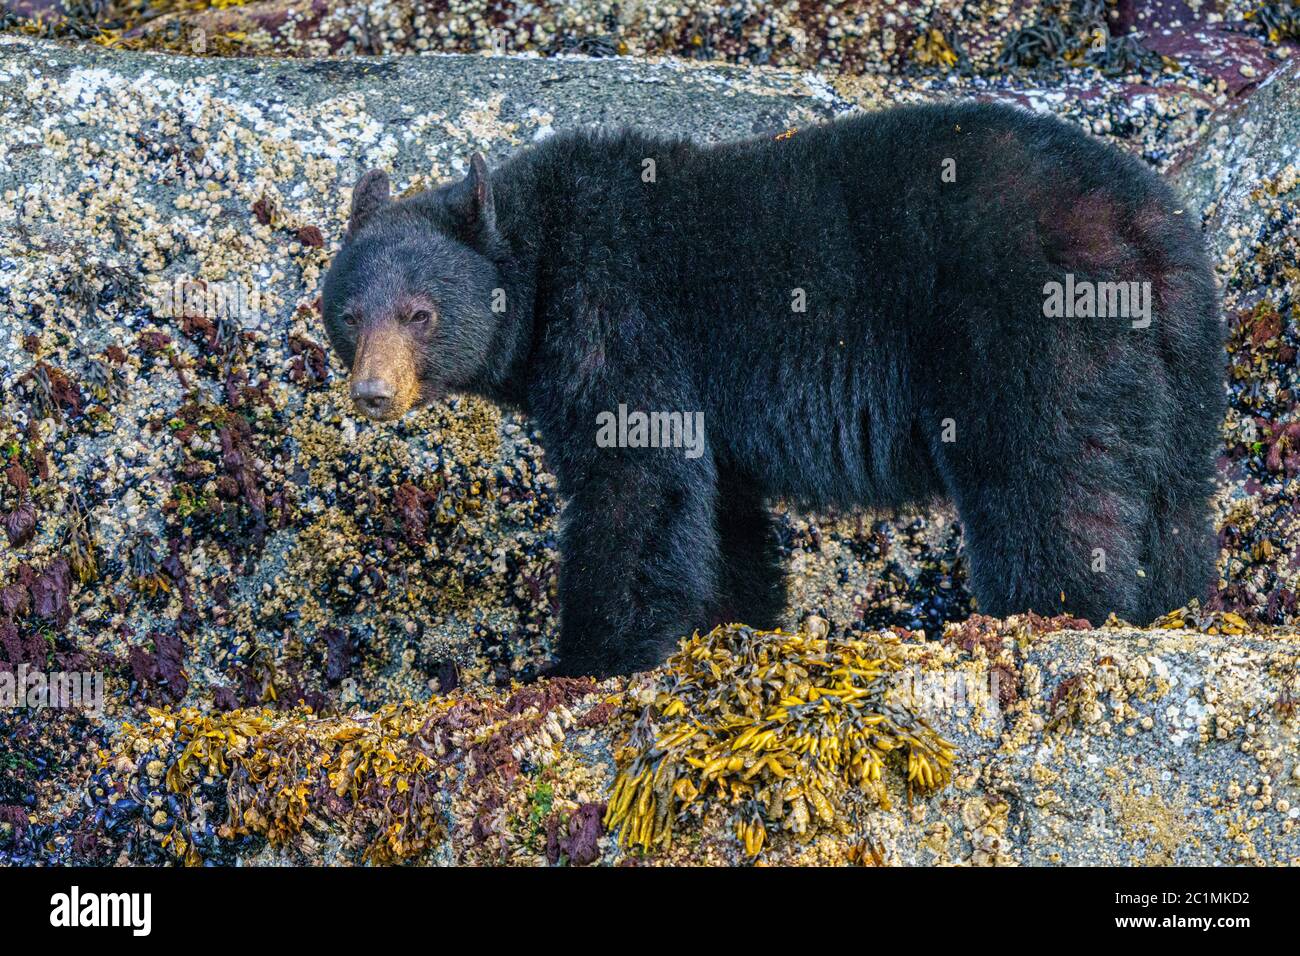 Black bear standing and foraging along the steep tideline in Knight Inlet, First Nations Territory, British Columbia, Canada. Stock Photo